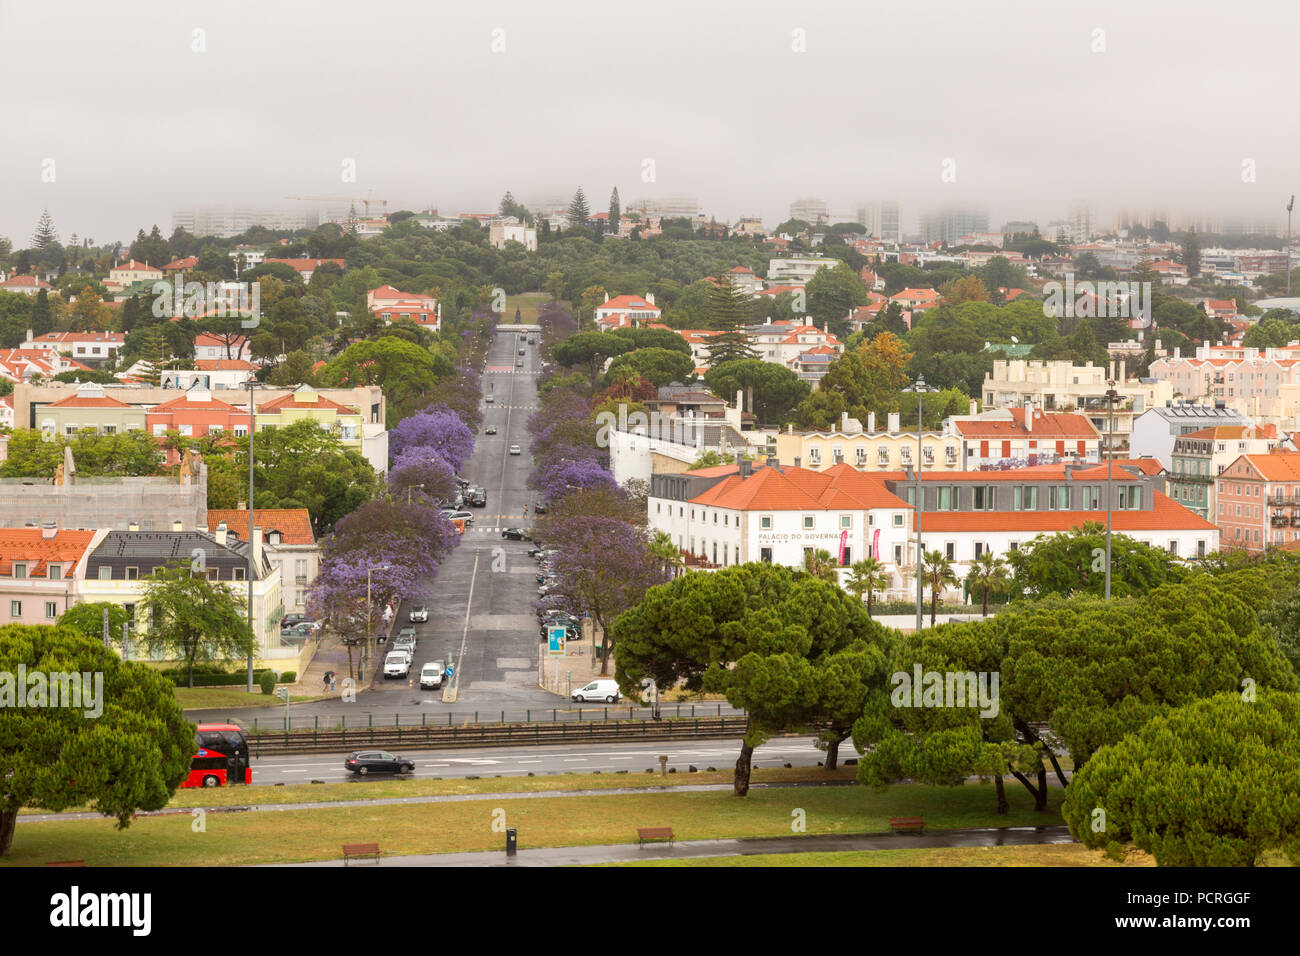 View of Lisbon from the top of the Belem Tower. The street is lined with blooming Jacaranda trees. Stock Photo